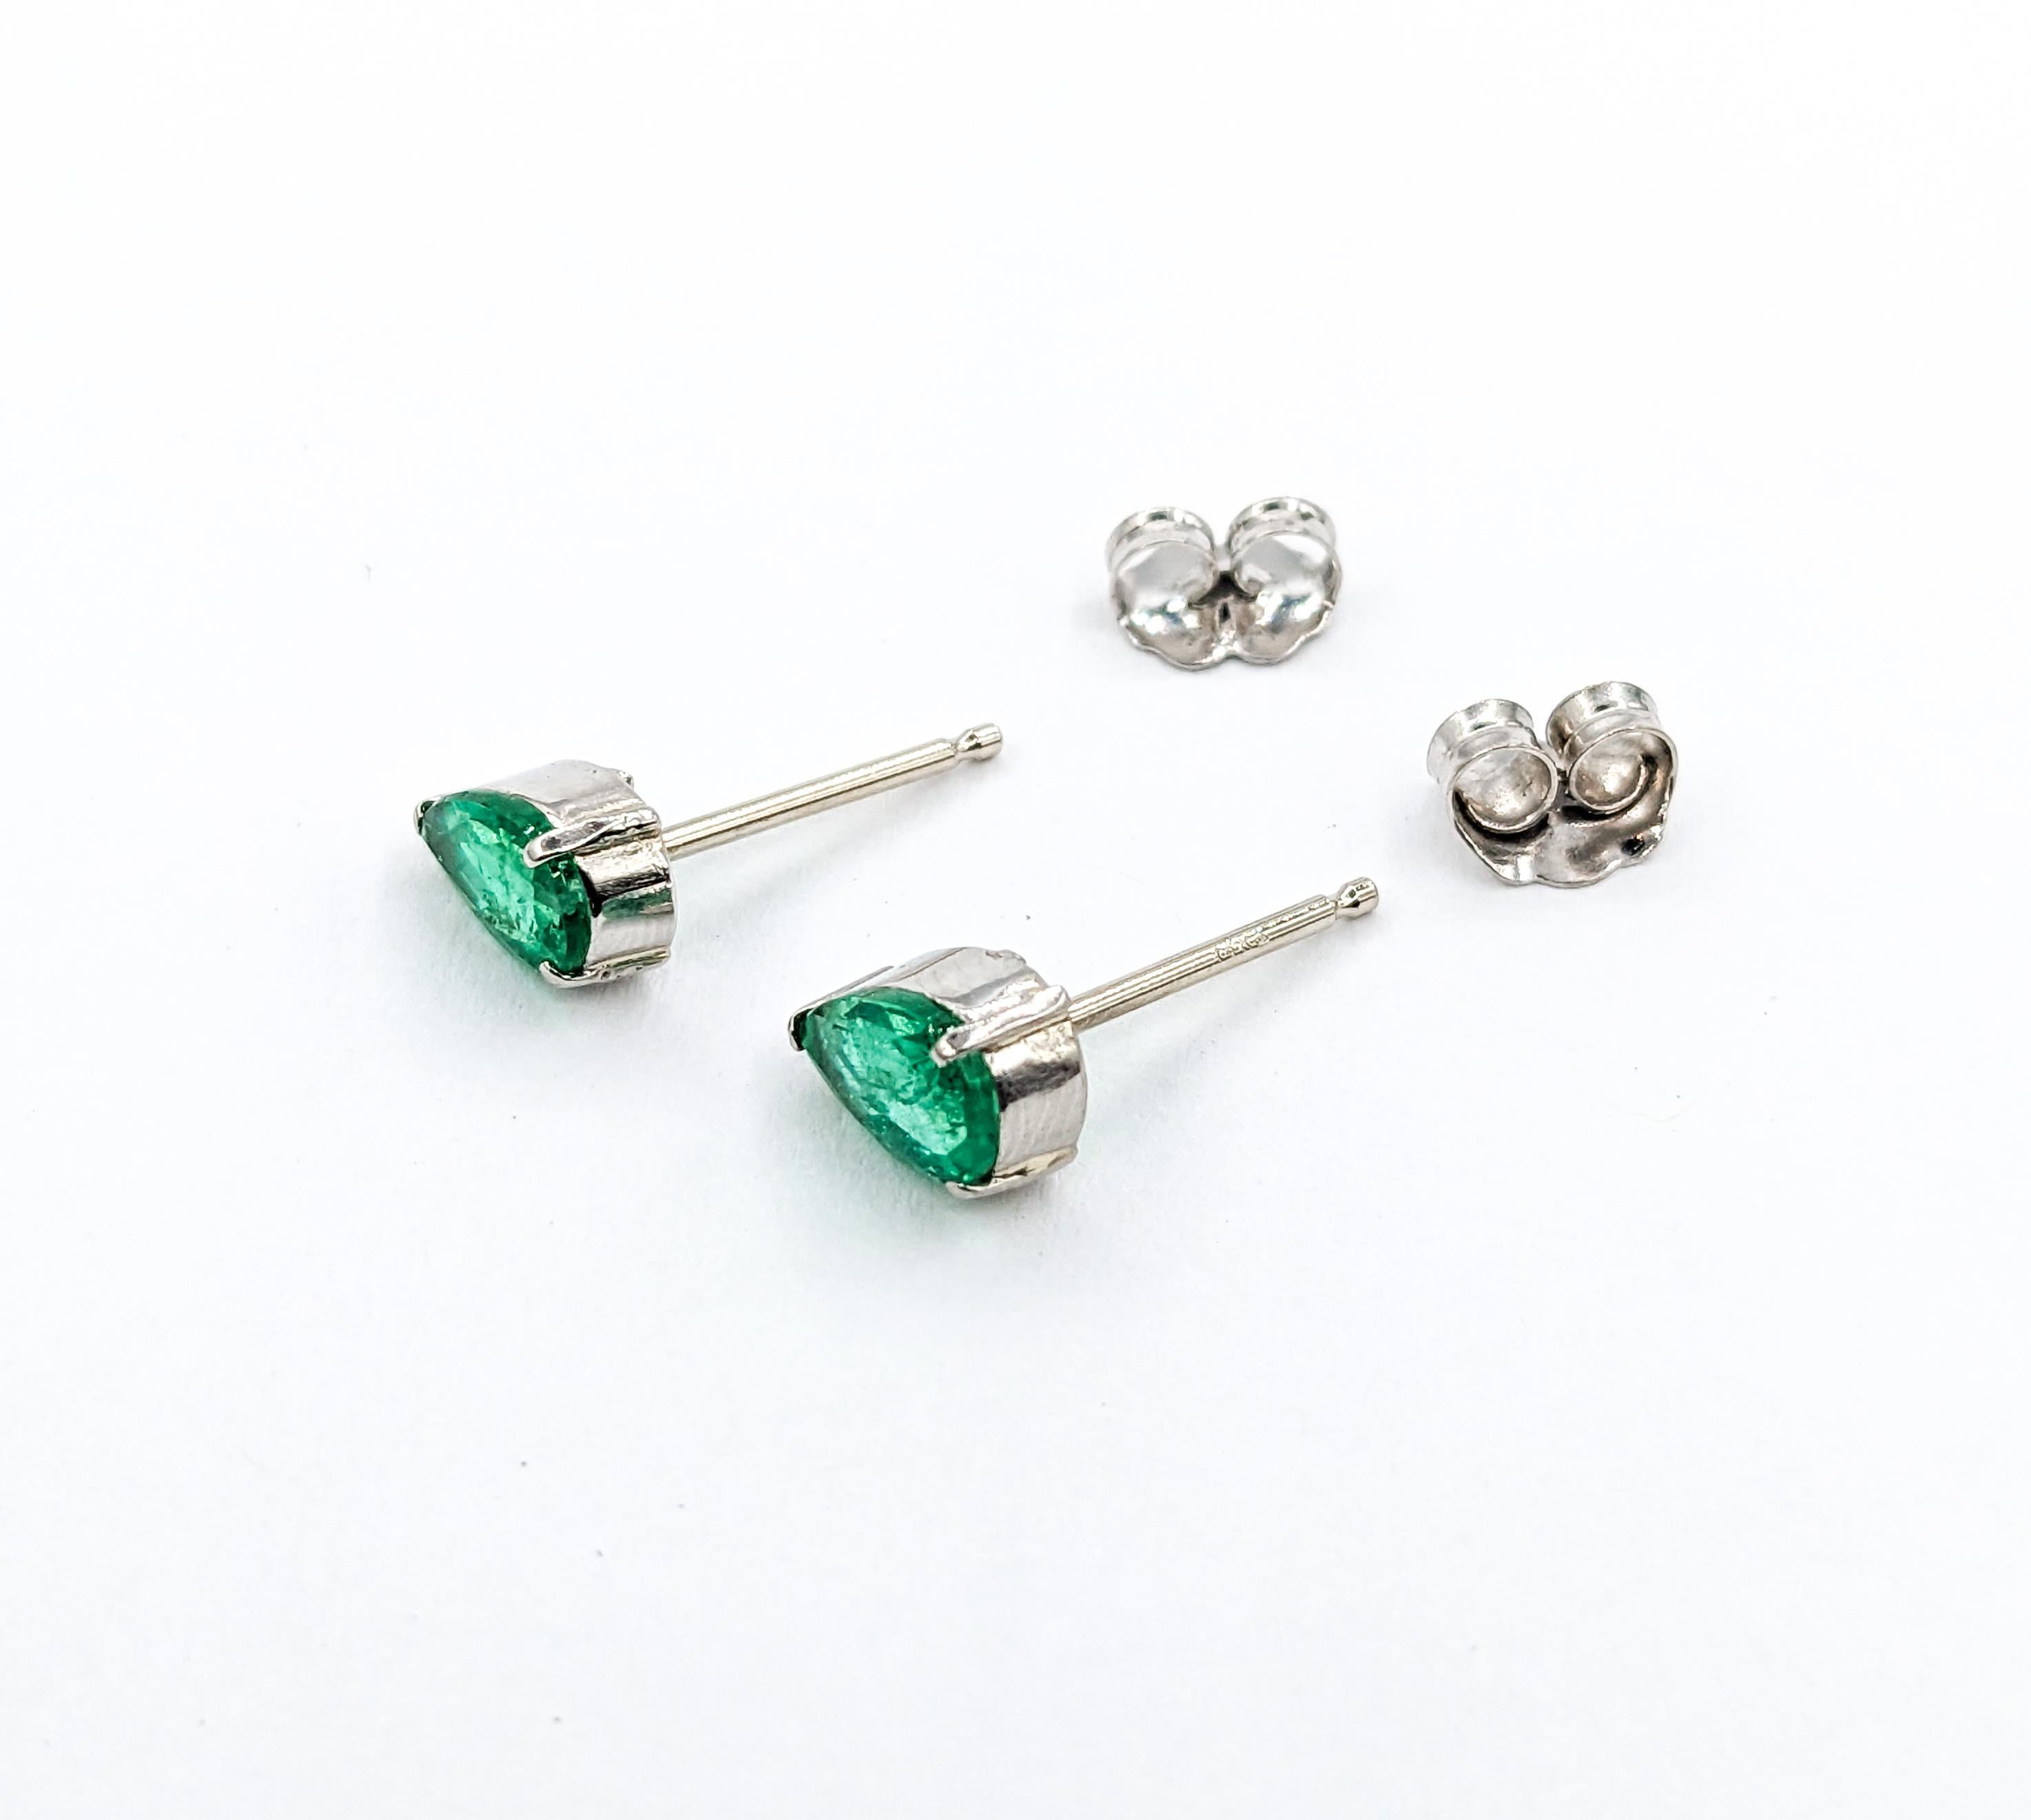 Natural Pear Shape Emerald Stud Earring in White Gold

Unveil the splendor of these stunning earrings, exquisitely crafted in 14k white gold. They boast a total of 1.50 carats of emeralds, each sparkling with captivating clarity and a rich, vibrant